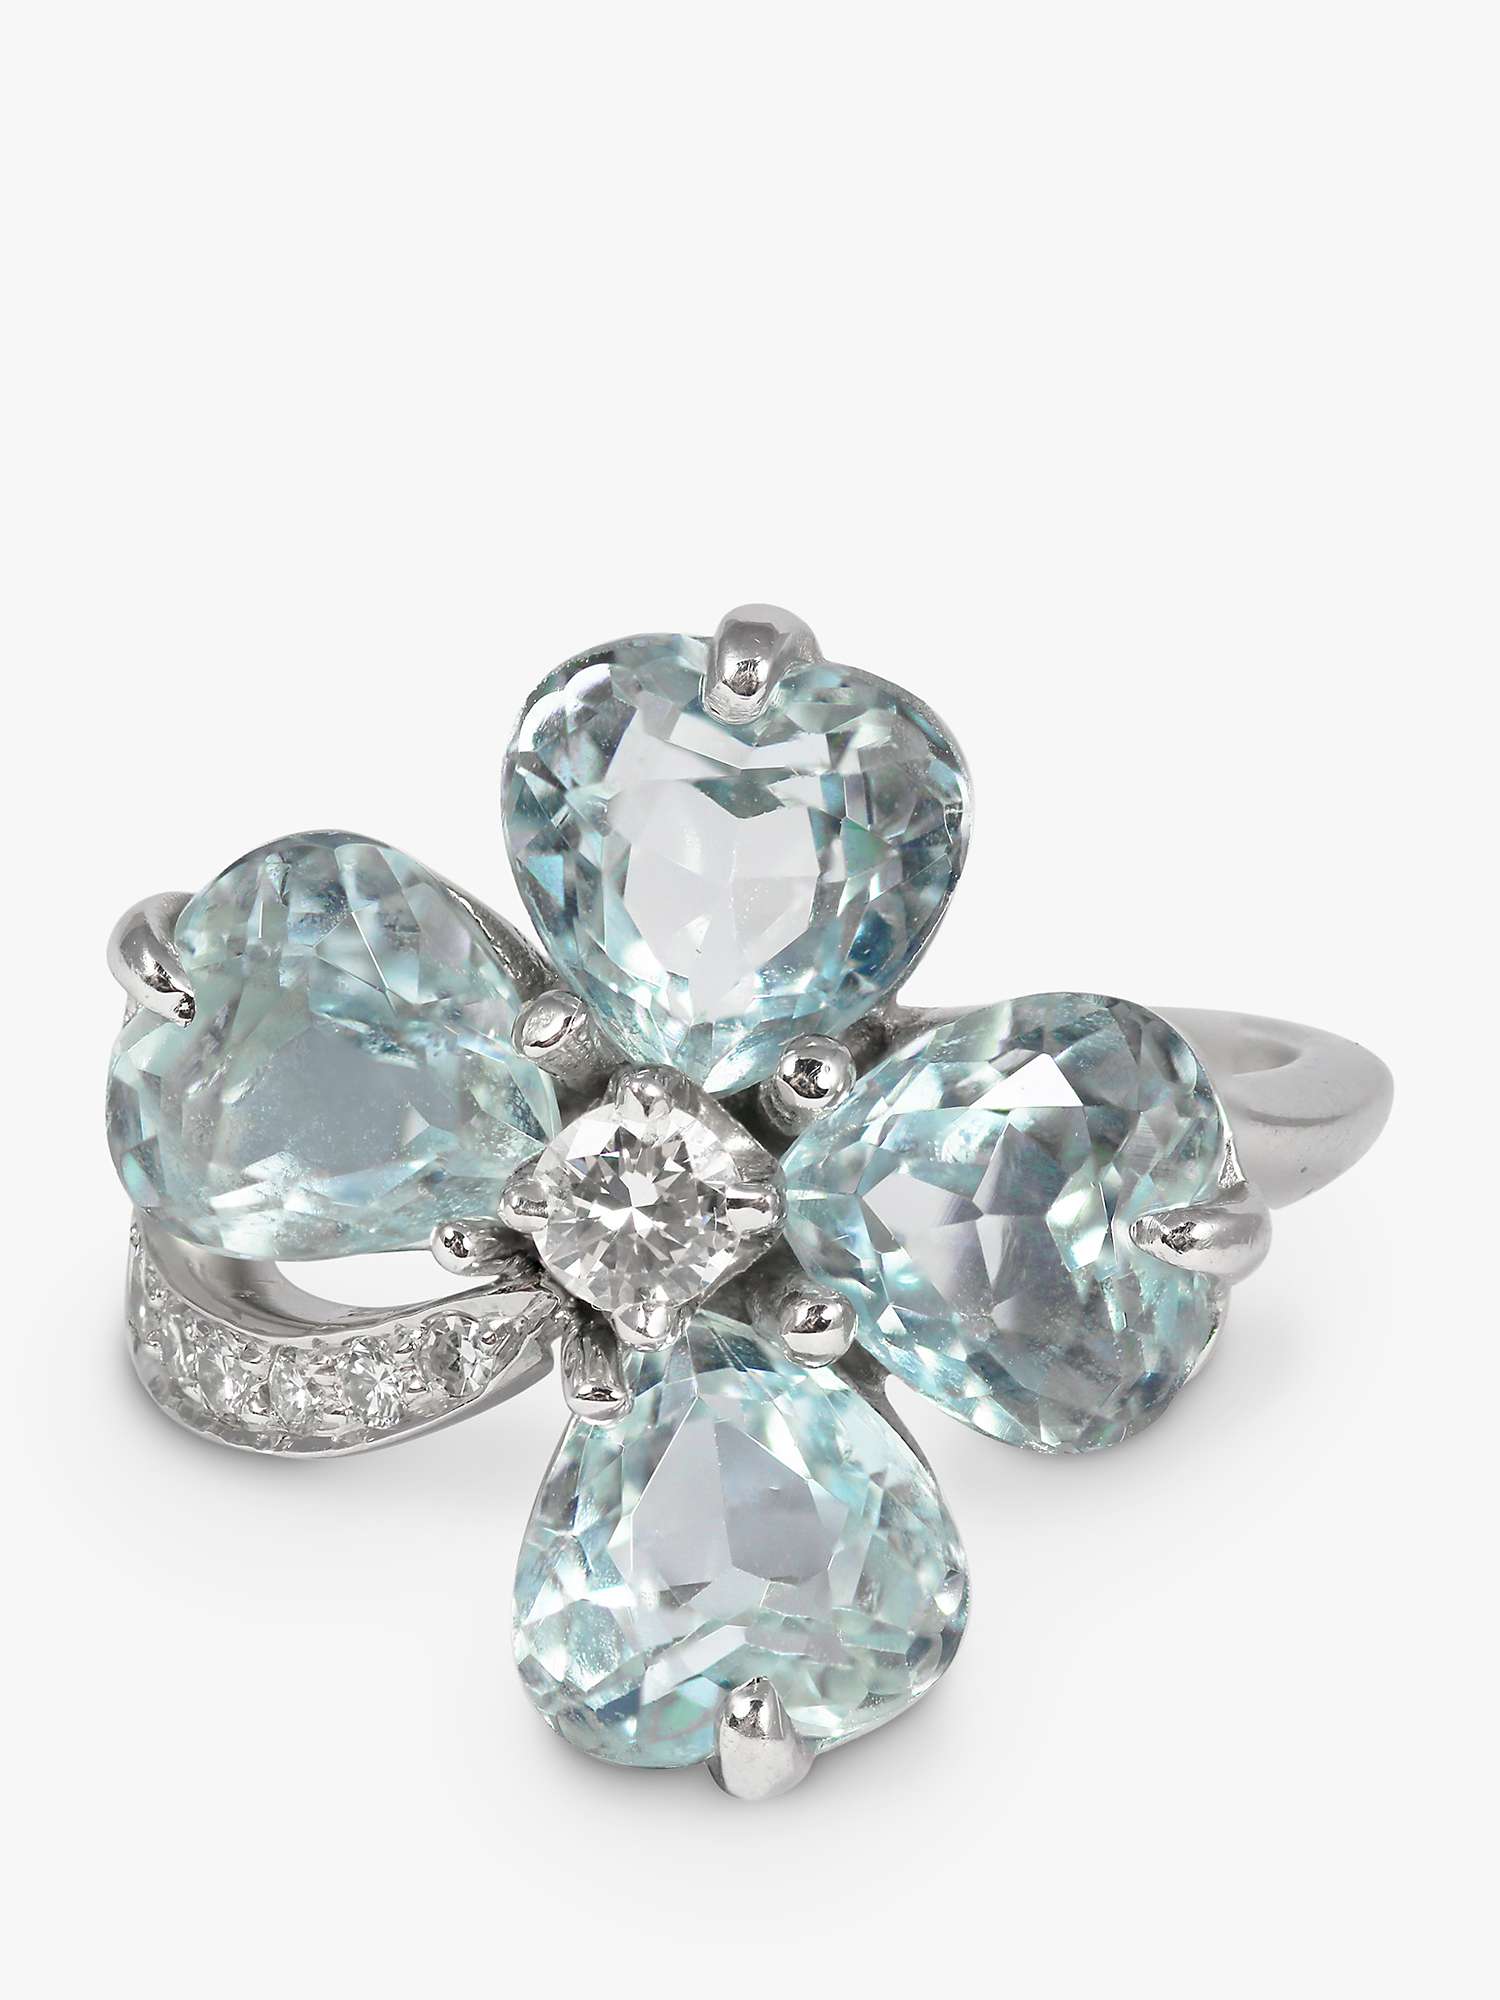 Buy Kojis 14ct White Gold Diamond and Aquamarine Second Hand Four Leaf Clover Ring Online at johnlewis.com